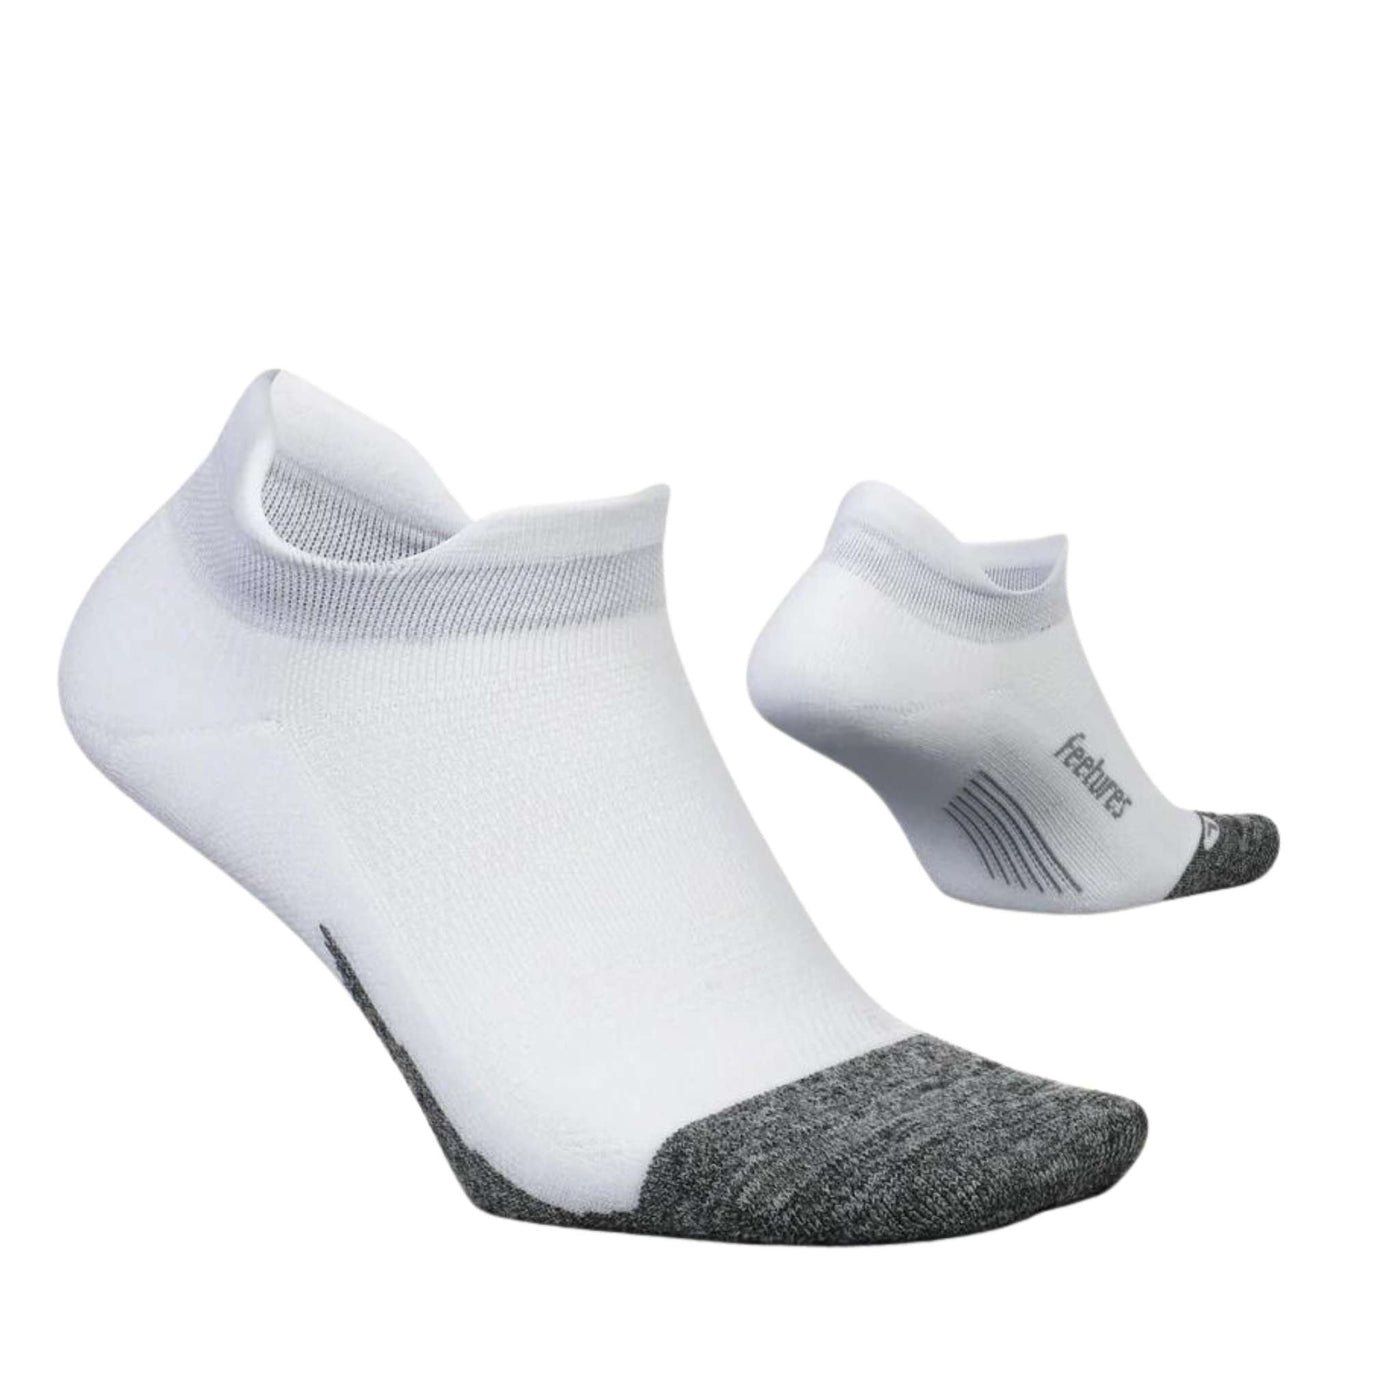 Feetures Elite Light Cushion No Show Tab | Performance & Active Socks | Further Faster Christchurch NZ #white